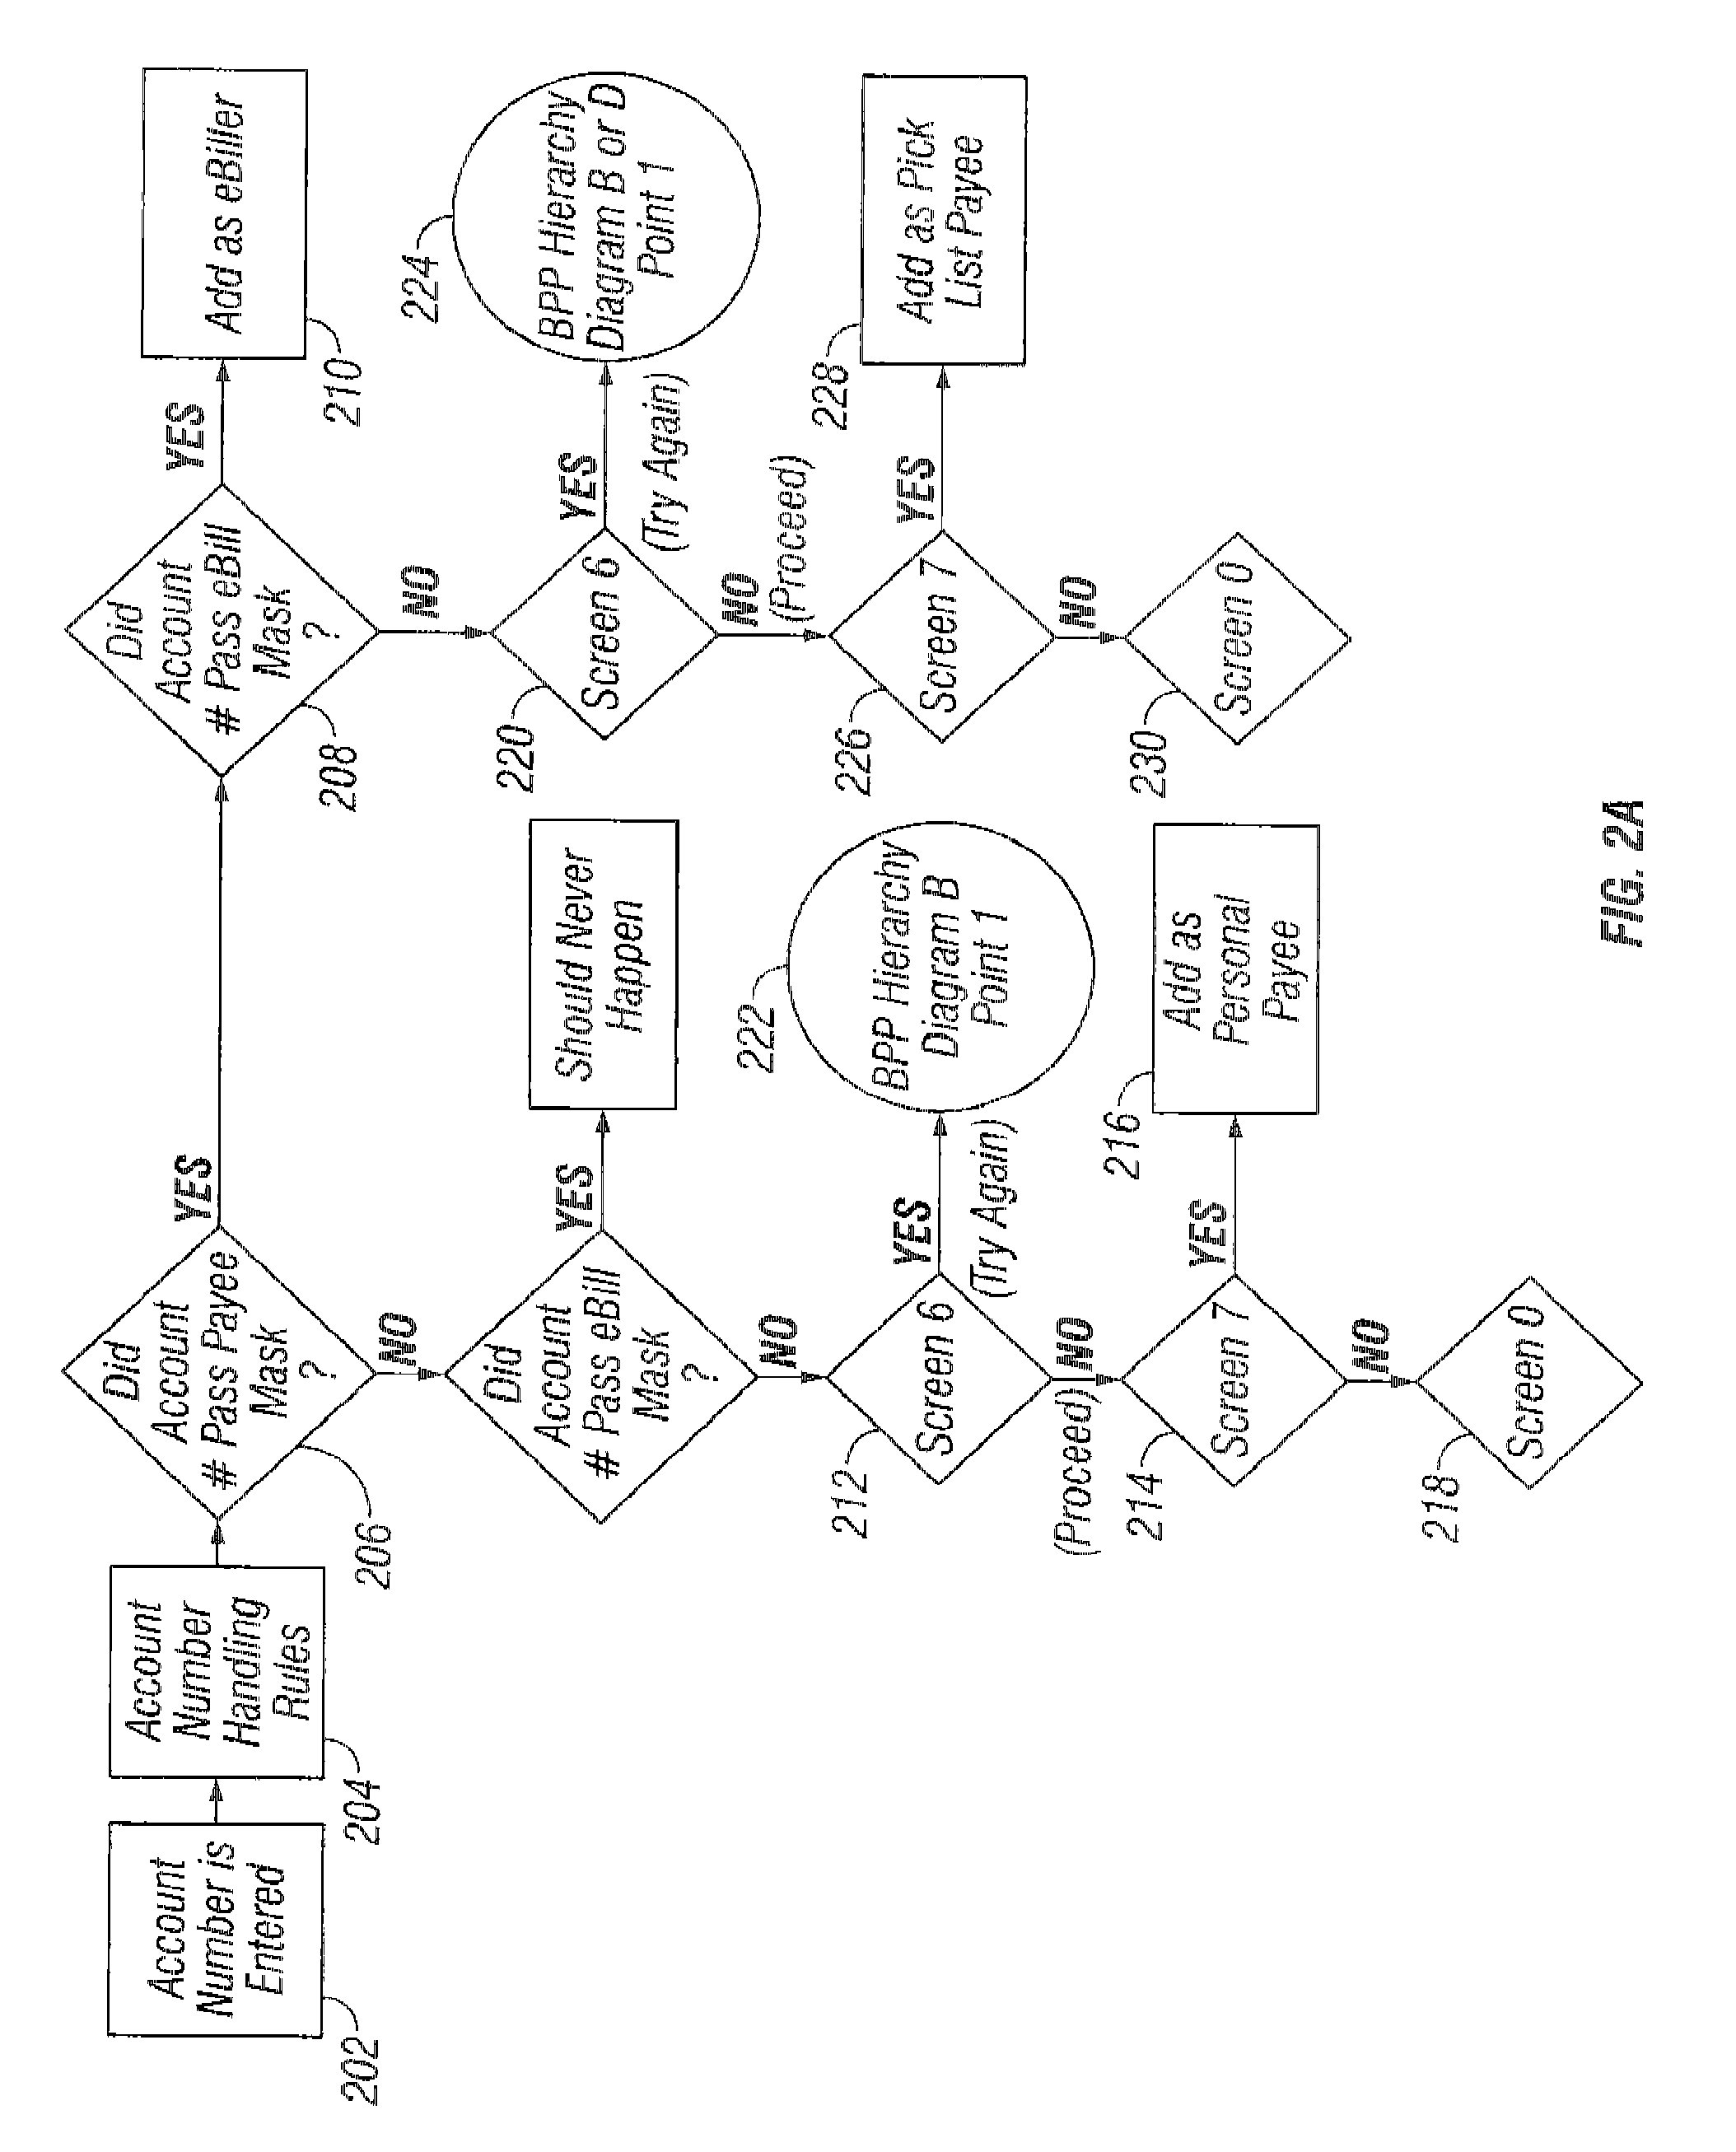 Electronic bill pay and bill presentment account number treatment system and method